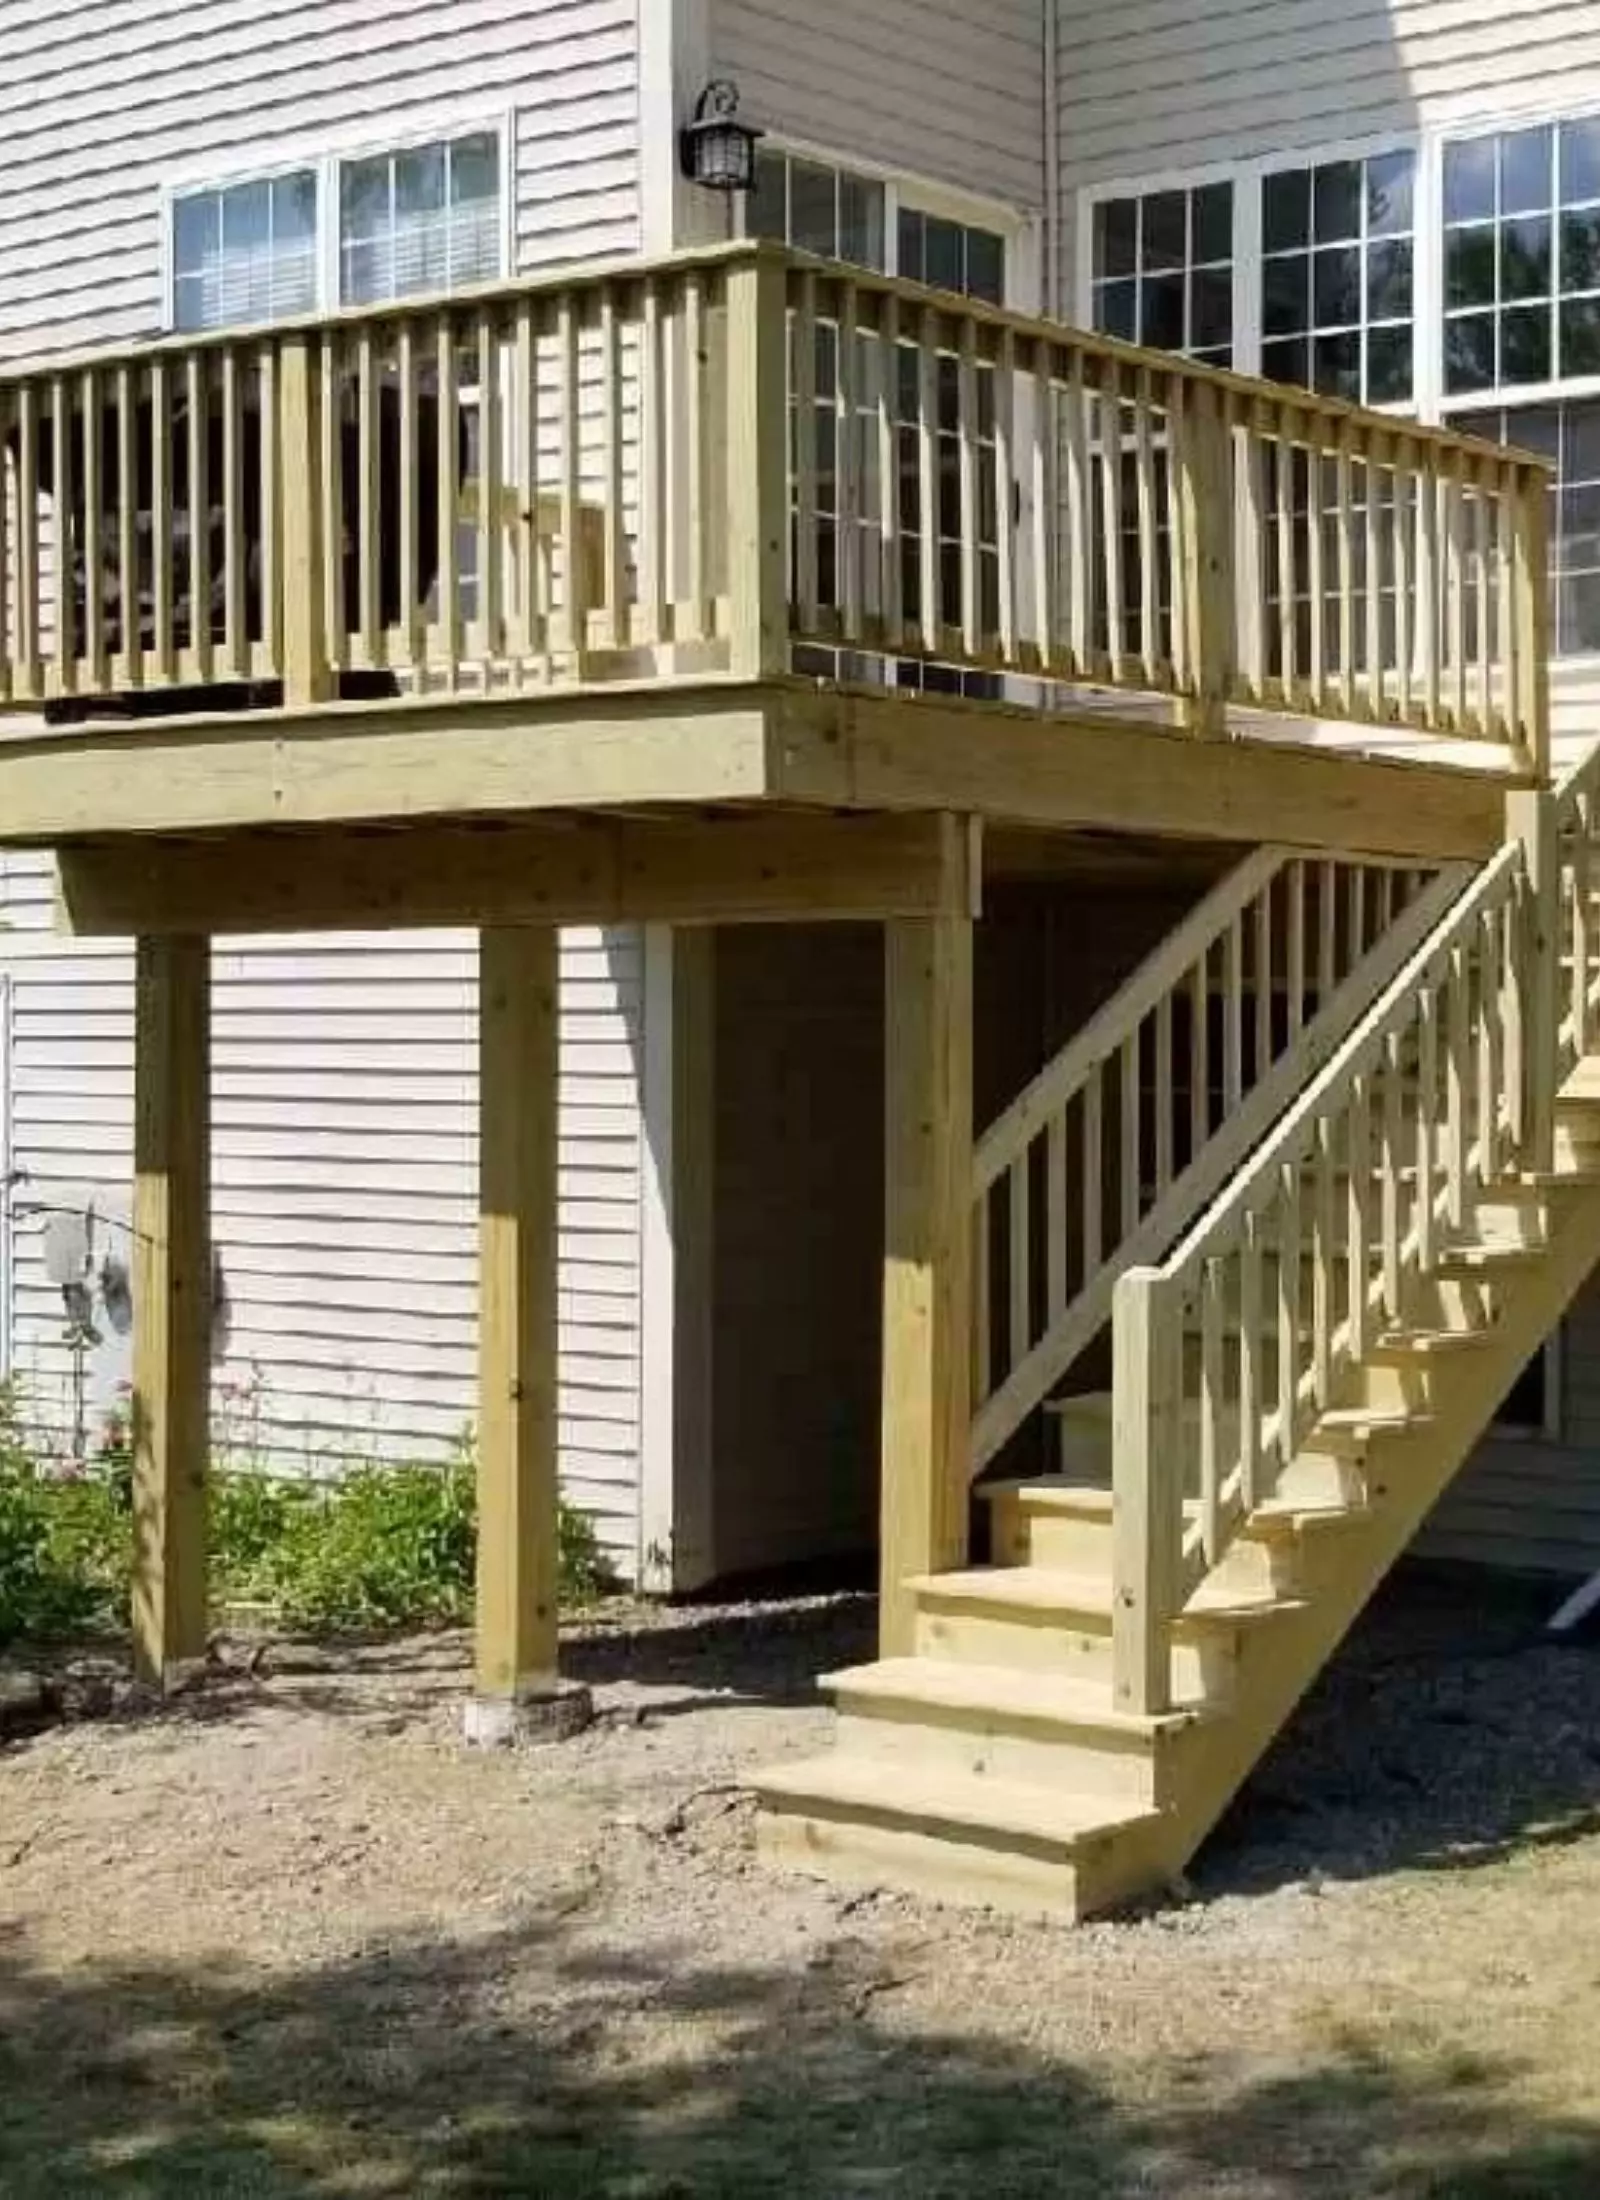 A wooden deck with stairs and railings in front of a house.